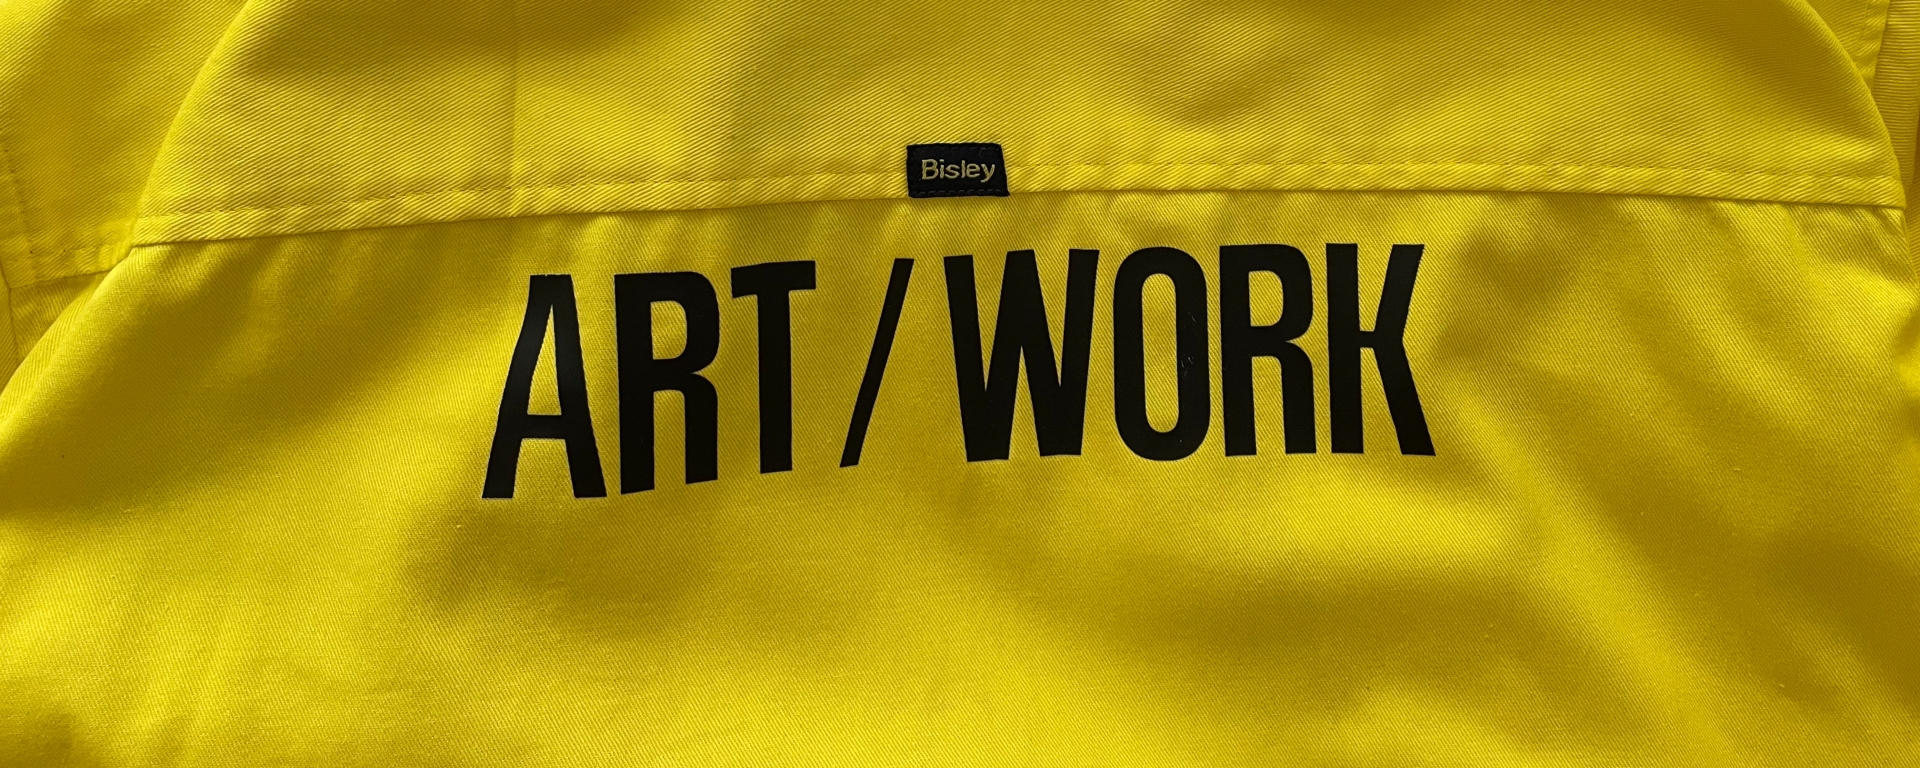 Hi-vis Bisley shirt with Art/Work on it by Ray Monde